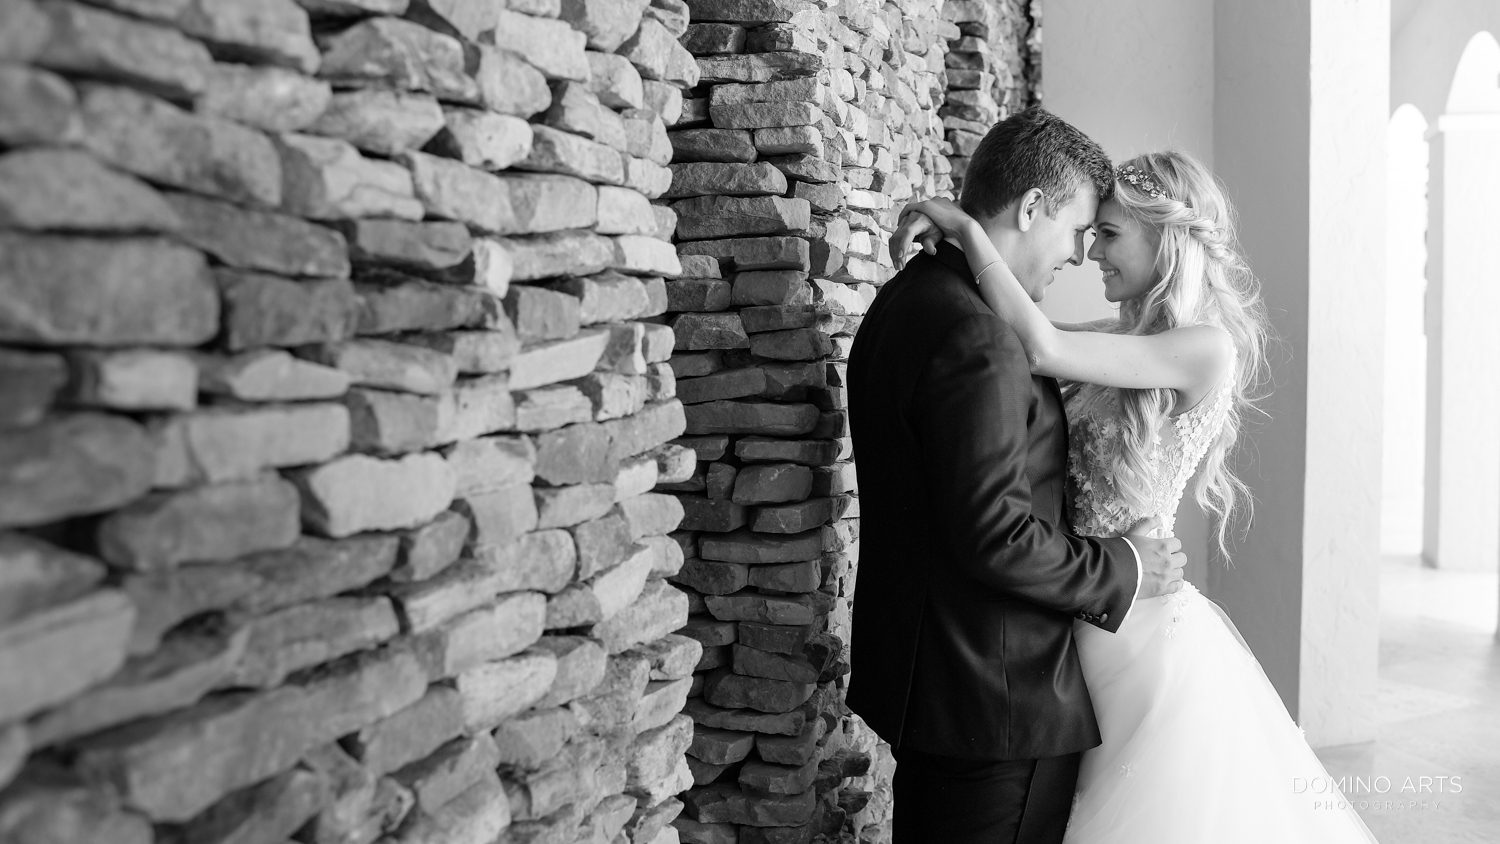 Romantic bride and groom picture at Turnberry Isle Aventura